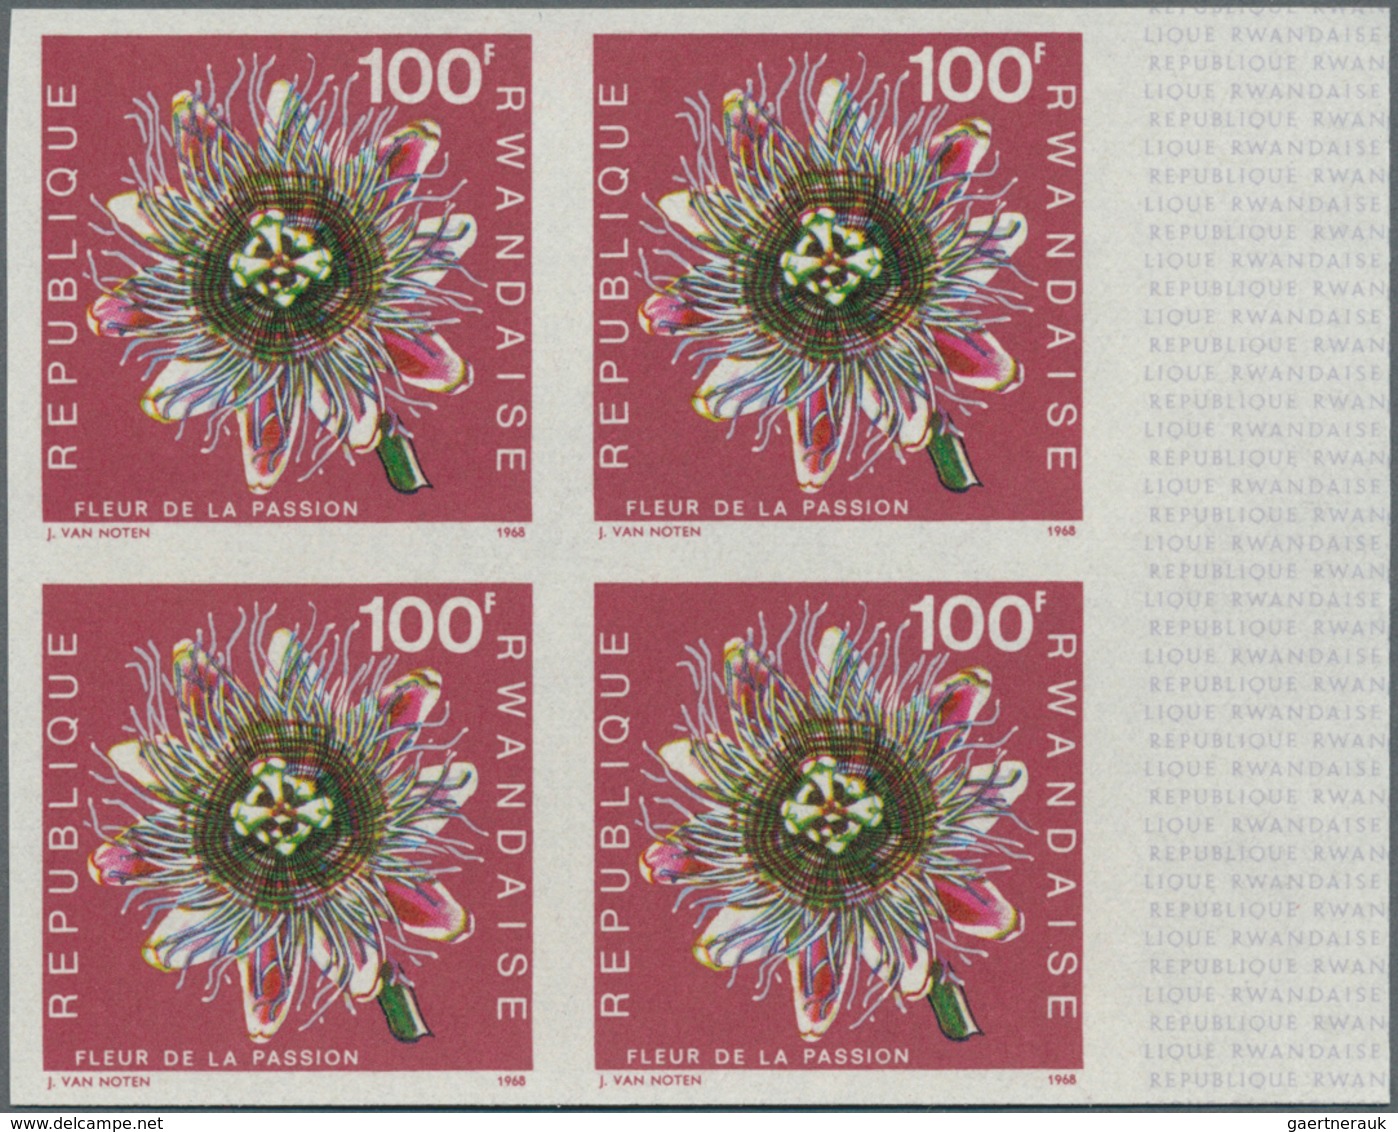 Übersee: 1970/1989 (ca.), accumulation with about 15.000 (!) IMPERFORATE stamps from Aitutaki, Burun